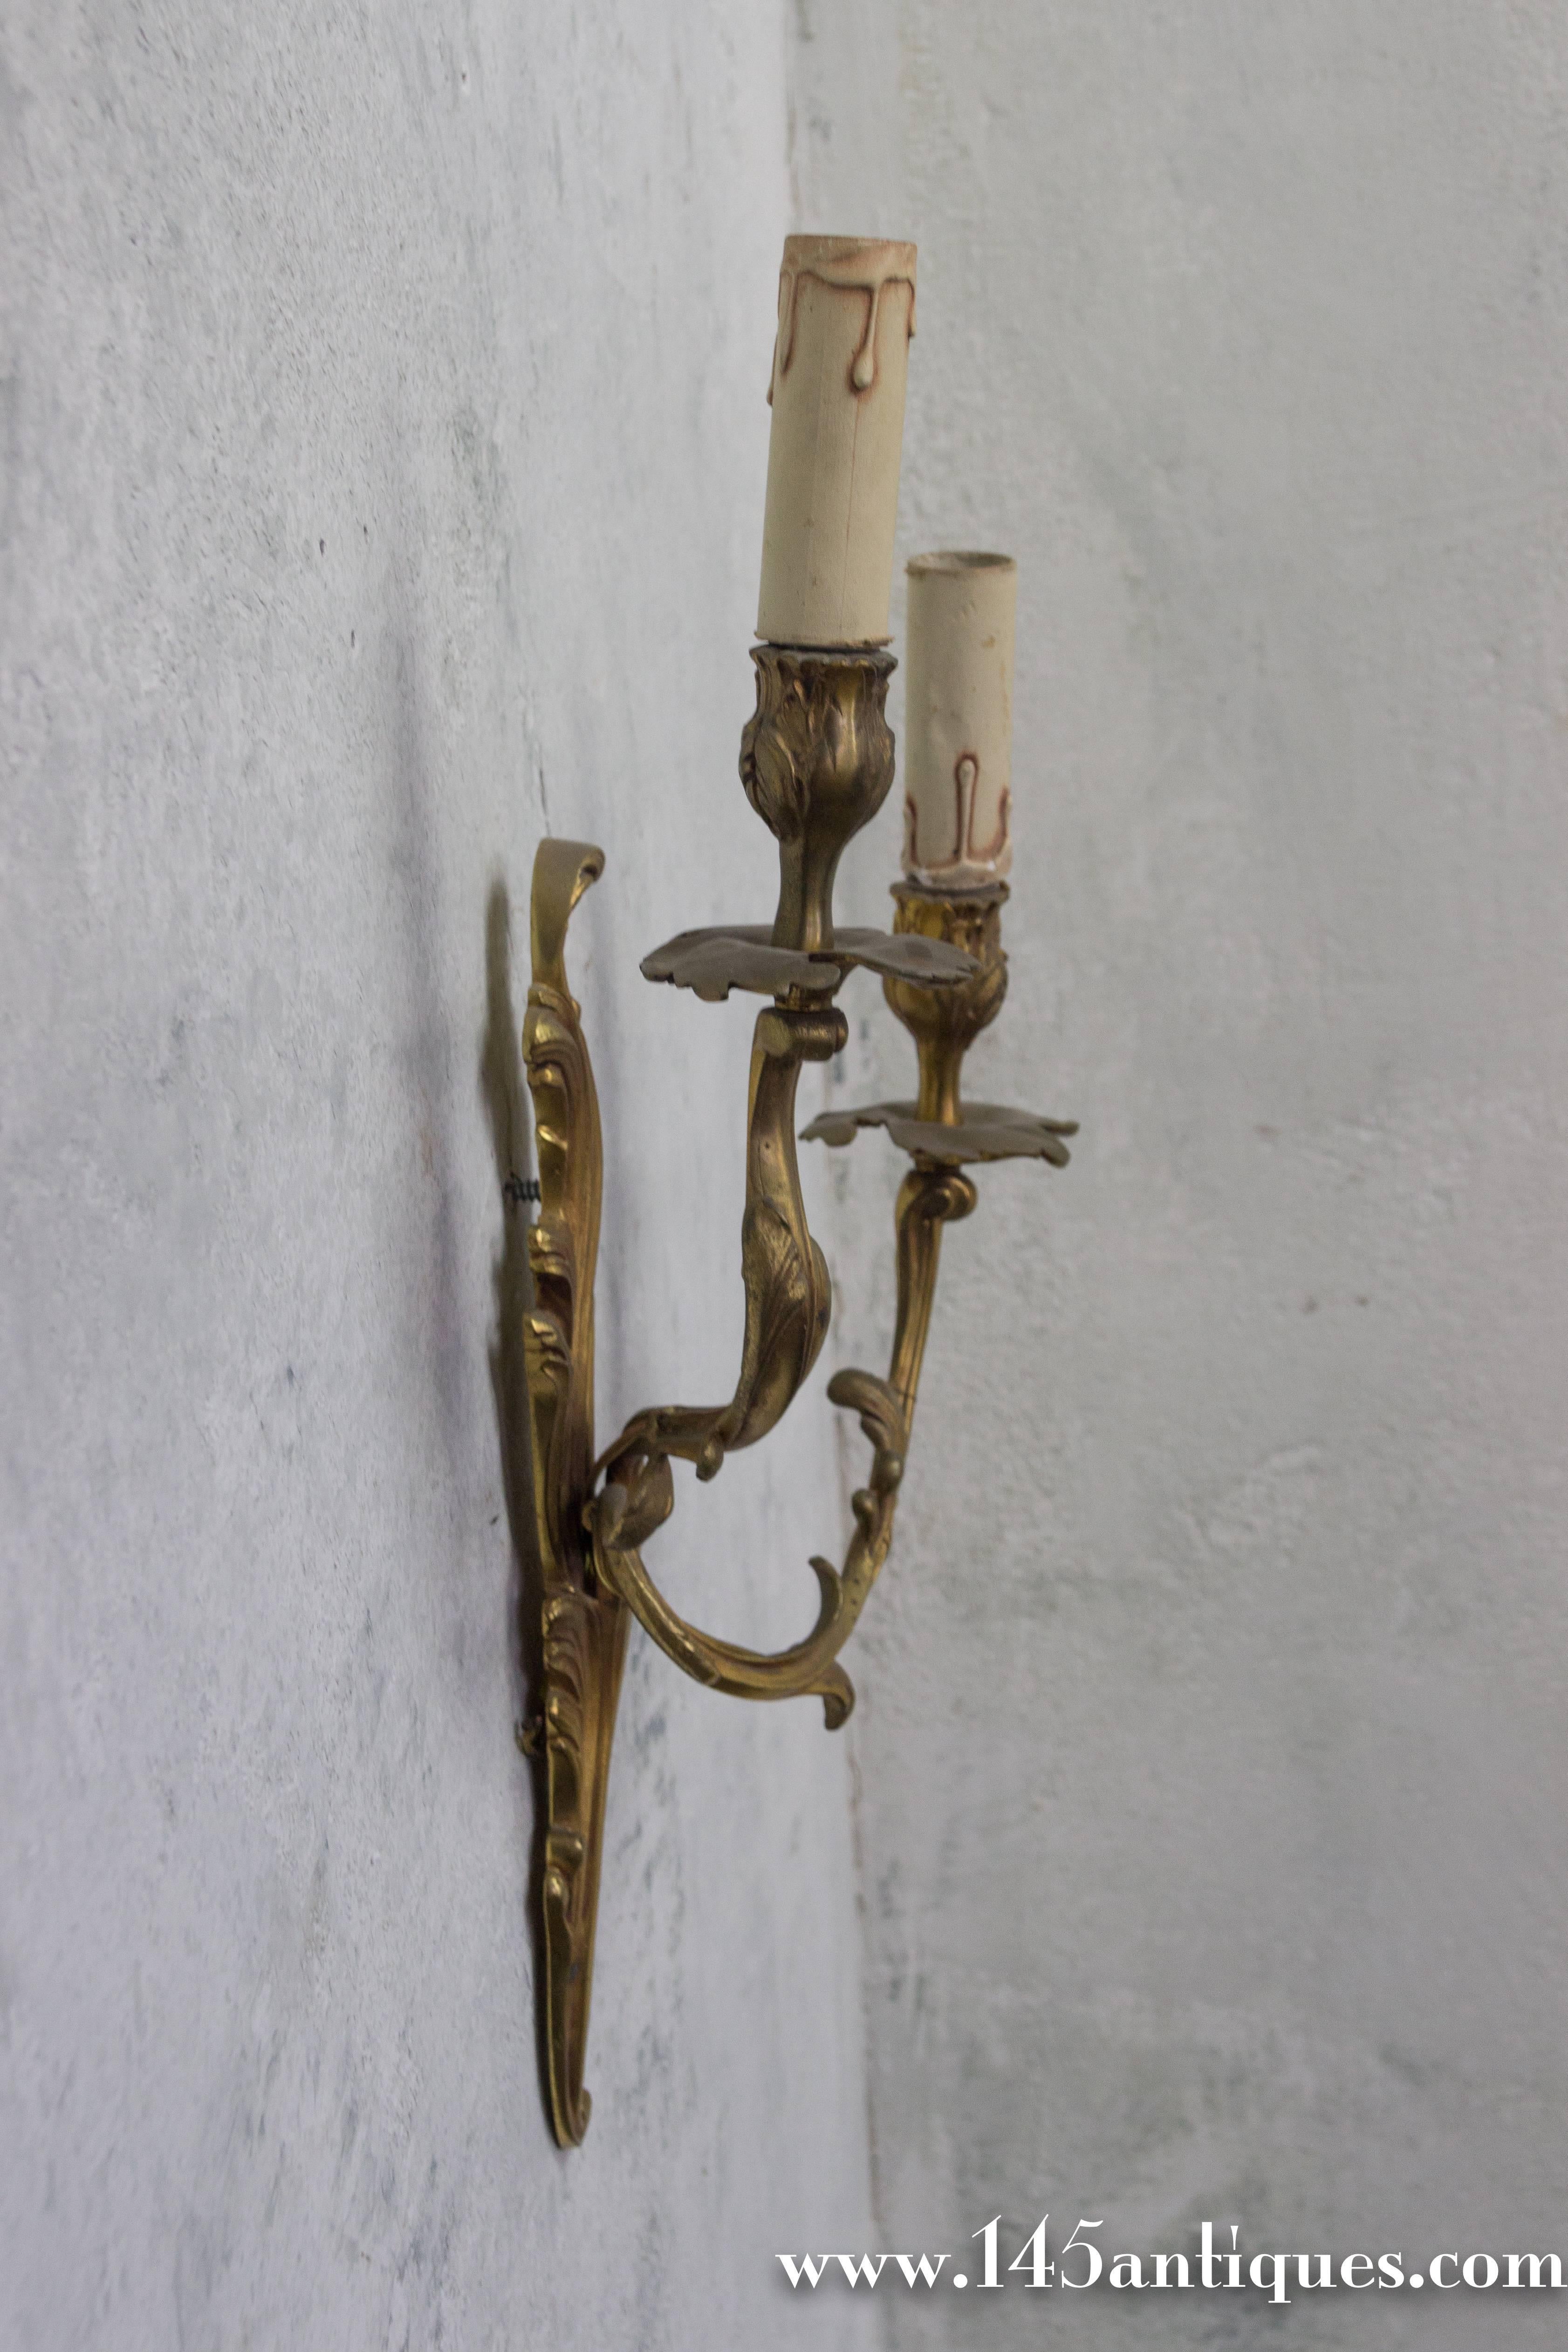 Elegant pair of French 1920s gilt bronze sconces with two arms in the Louis XV style. Very good vintage condition, but will need to be wired.

Ref #: LS0408-09

Dimensions: 19